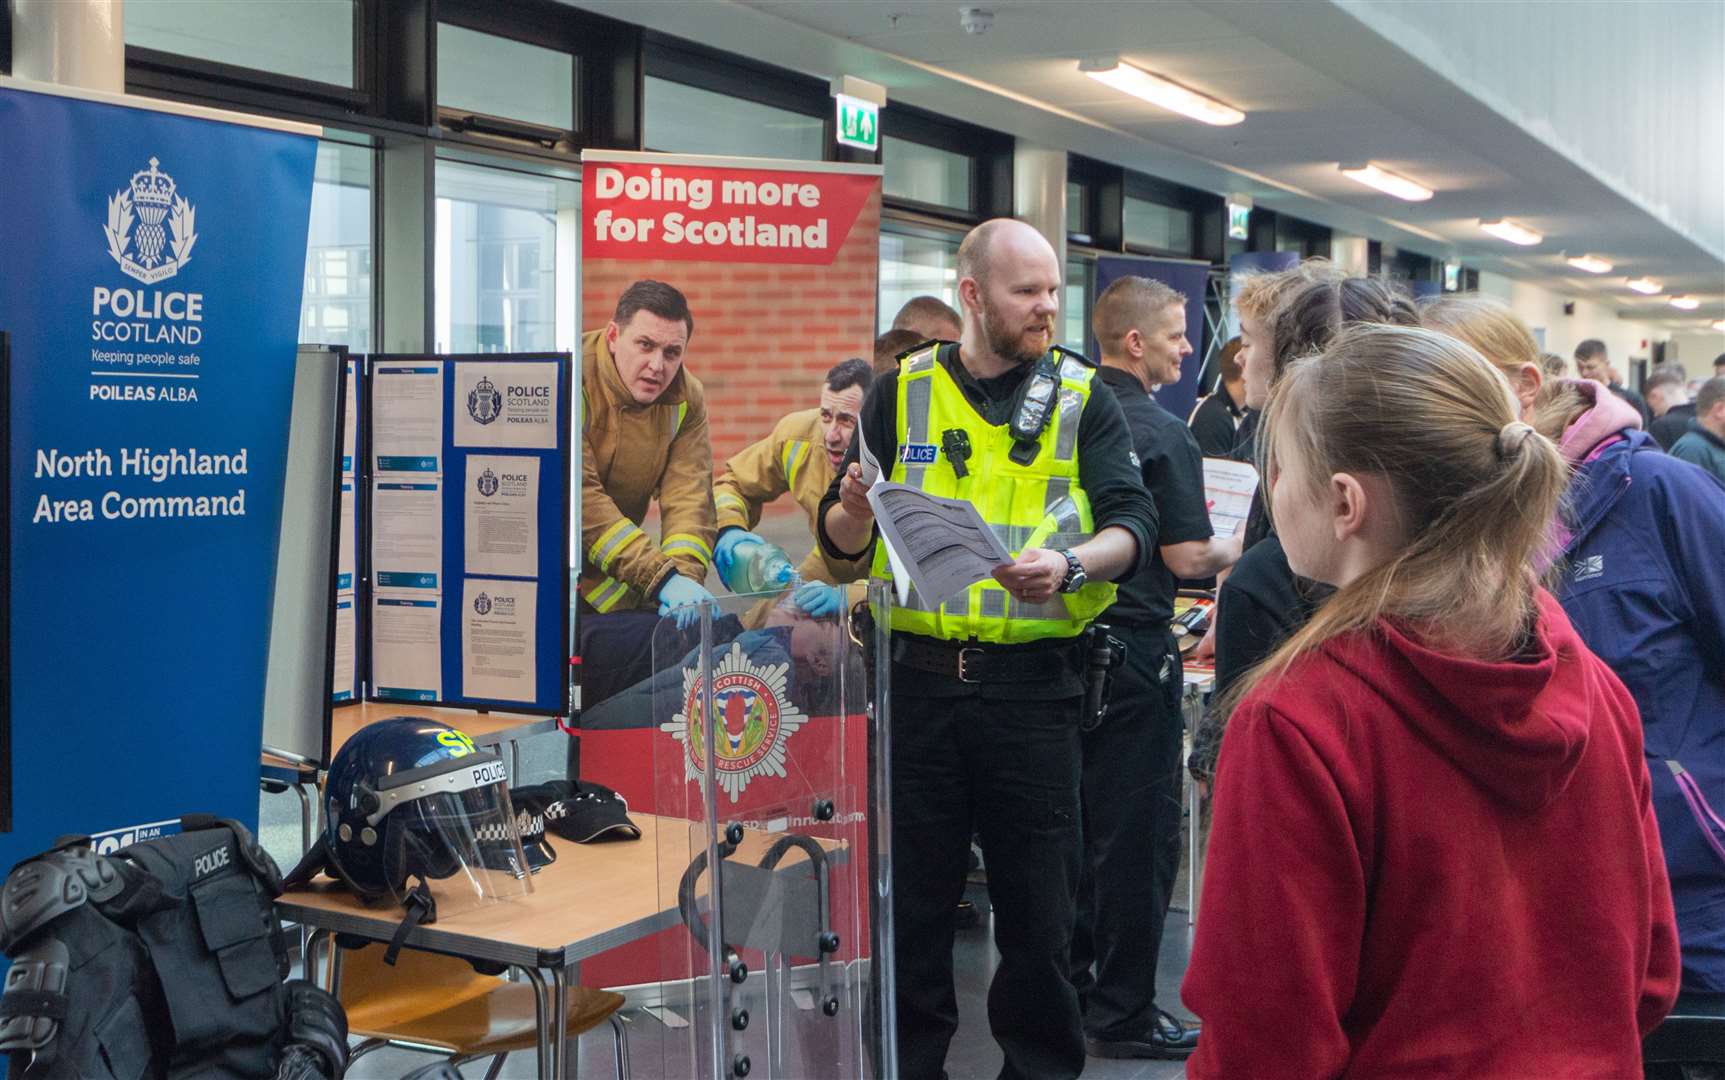 Emergency services were among the many organisations represented at Caithness Jobs and How to Get Them.